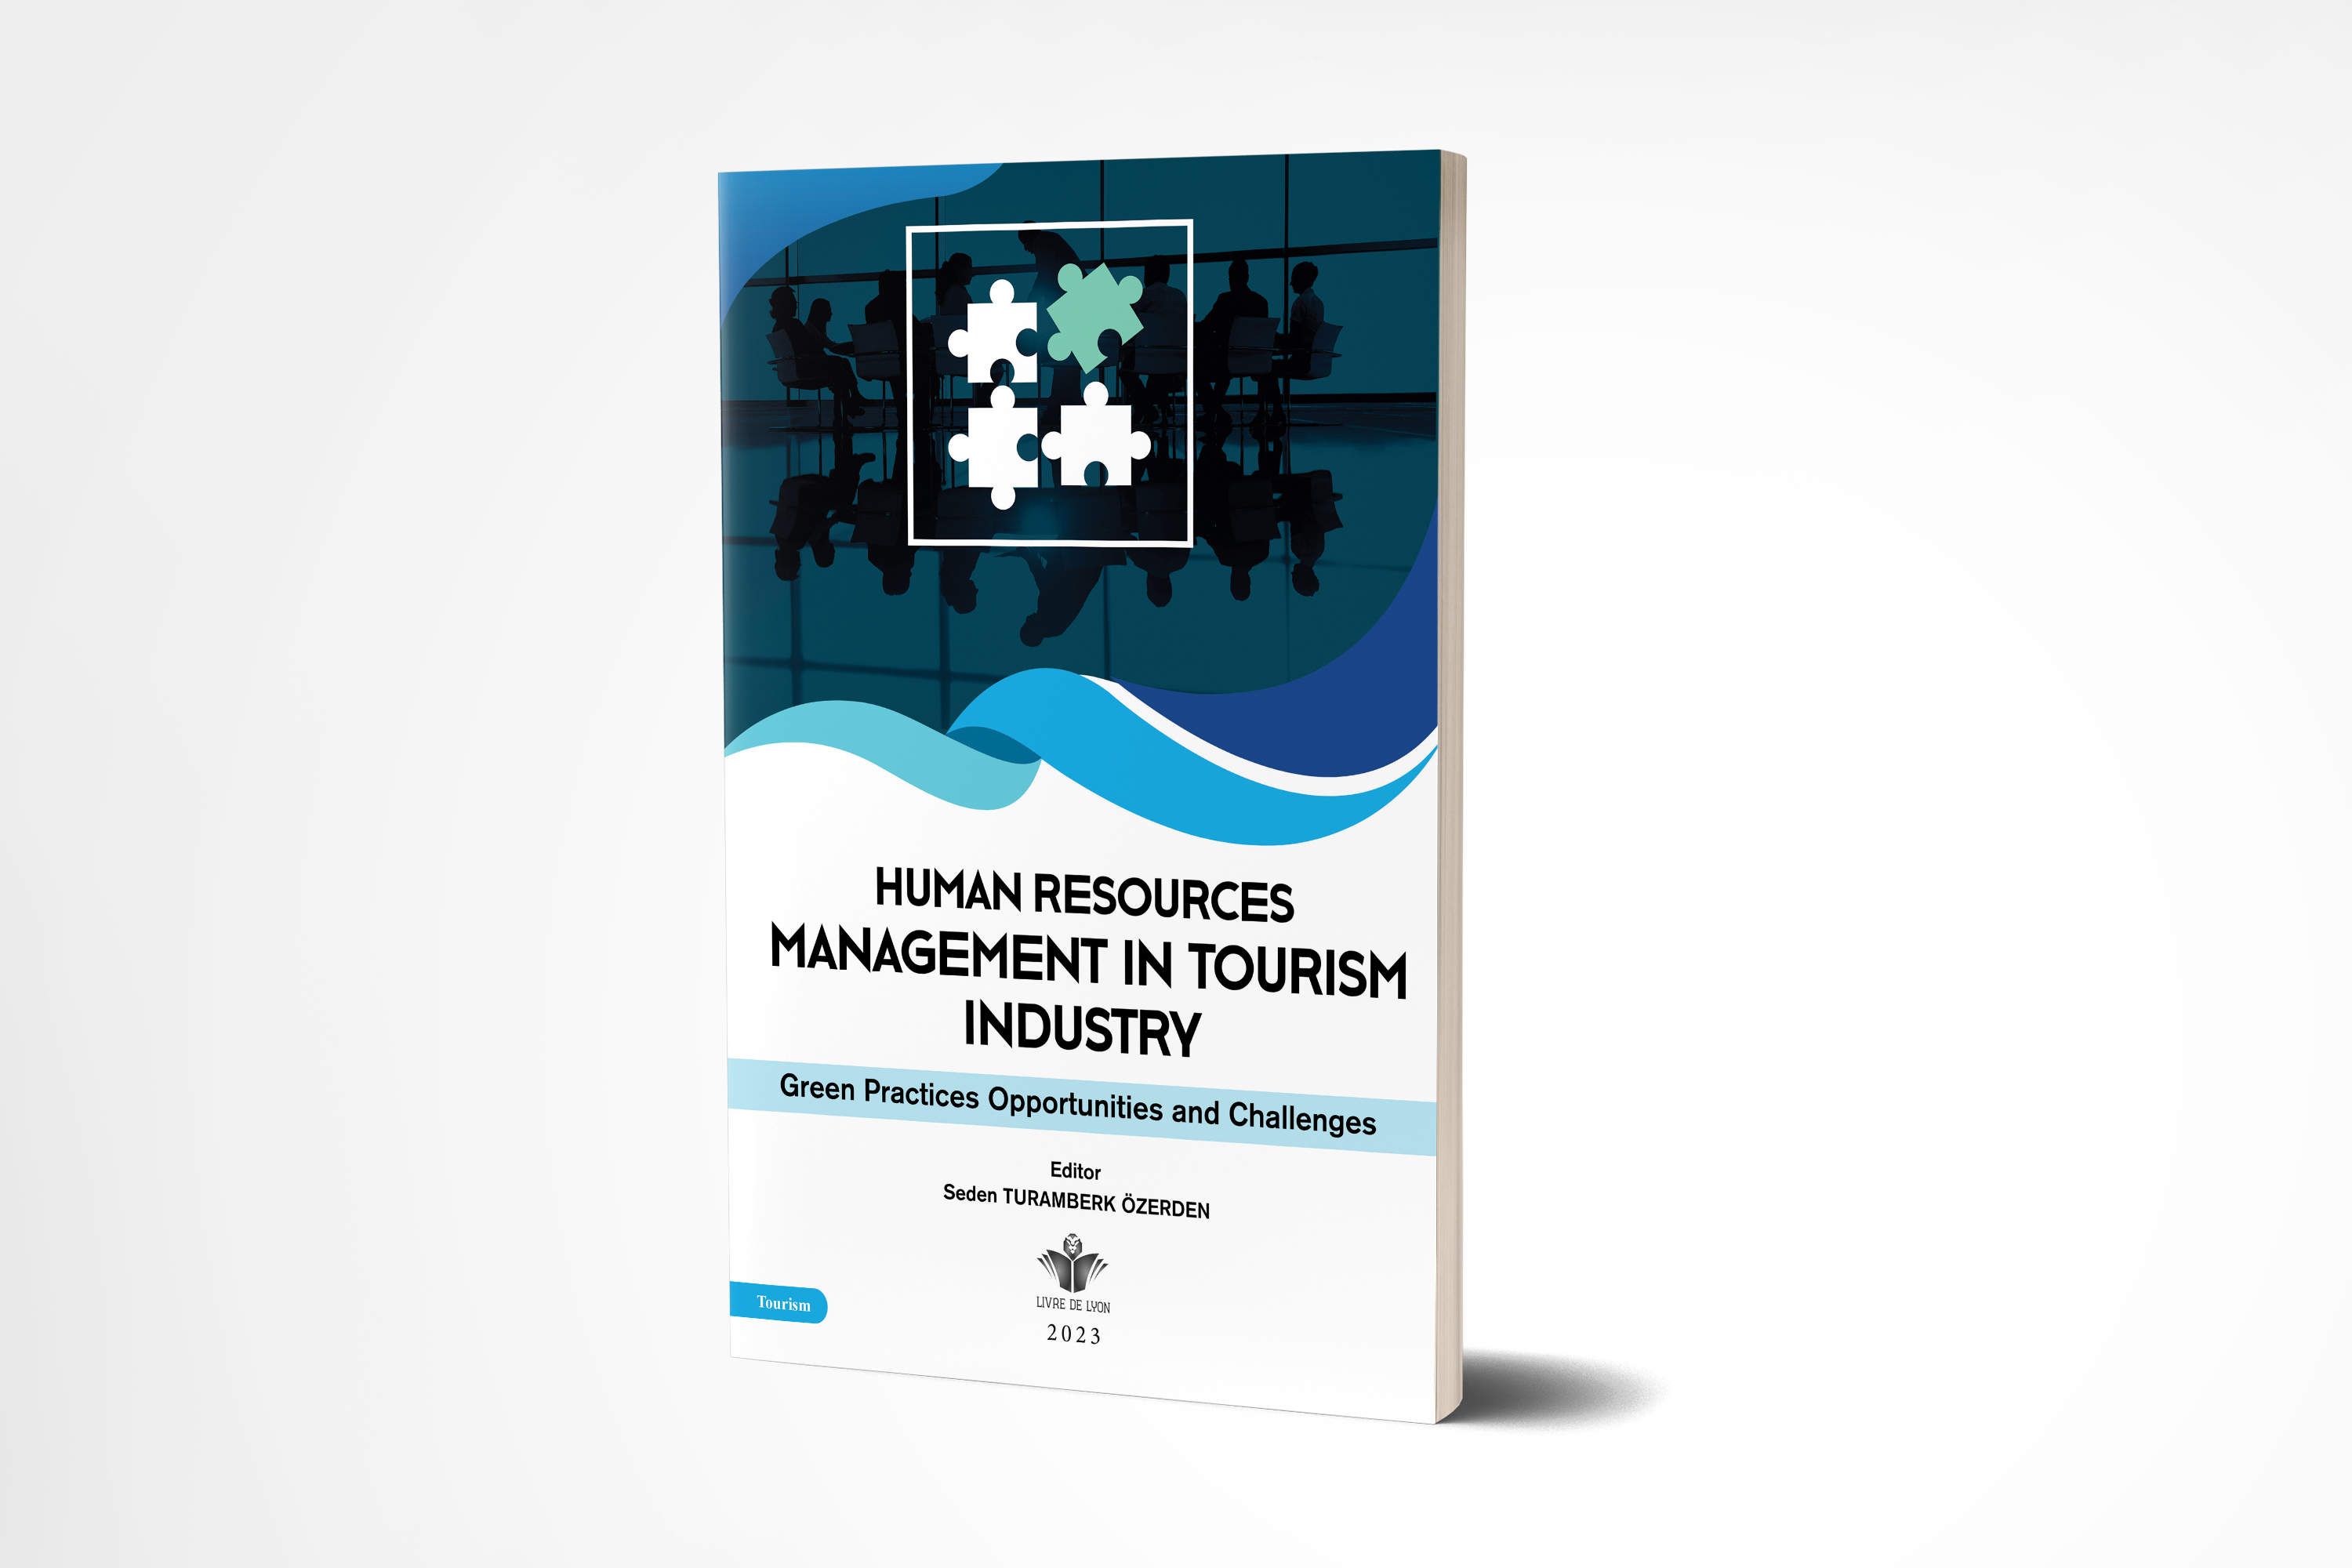 Human Resources Management in Tourism Industry: Green Practices Opportunities and Challenges